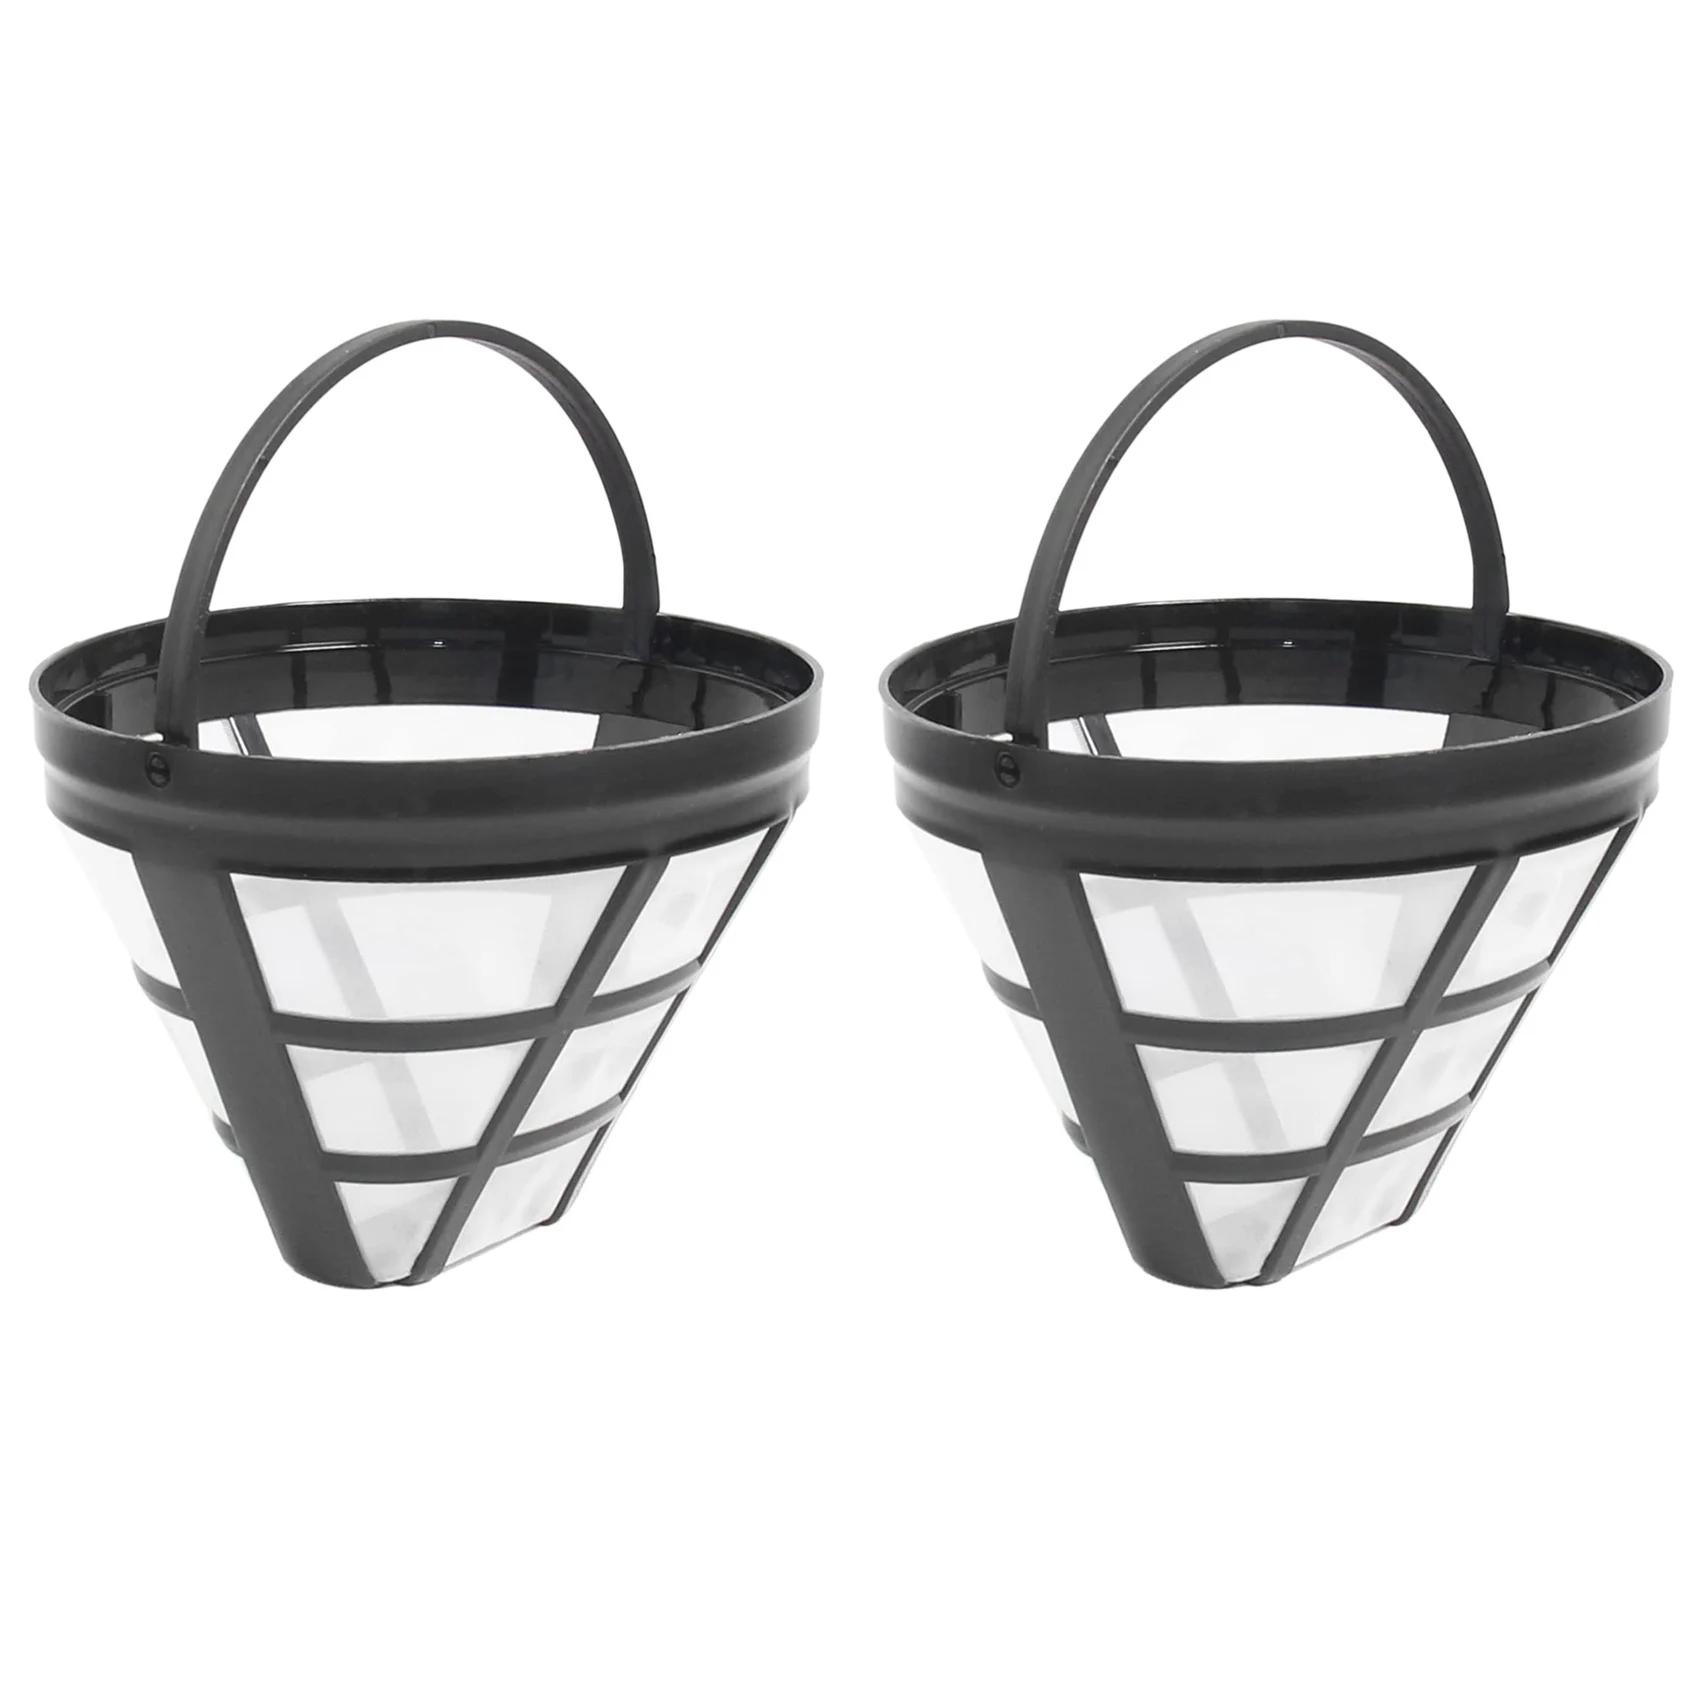 

2Pack No.4 Reusable Coffee Maker Basket Filter for Cuisinart Ninja Filters, Fit Most 8-12 Cup Basket Drip Coffee Machine